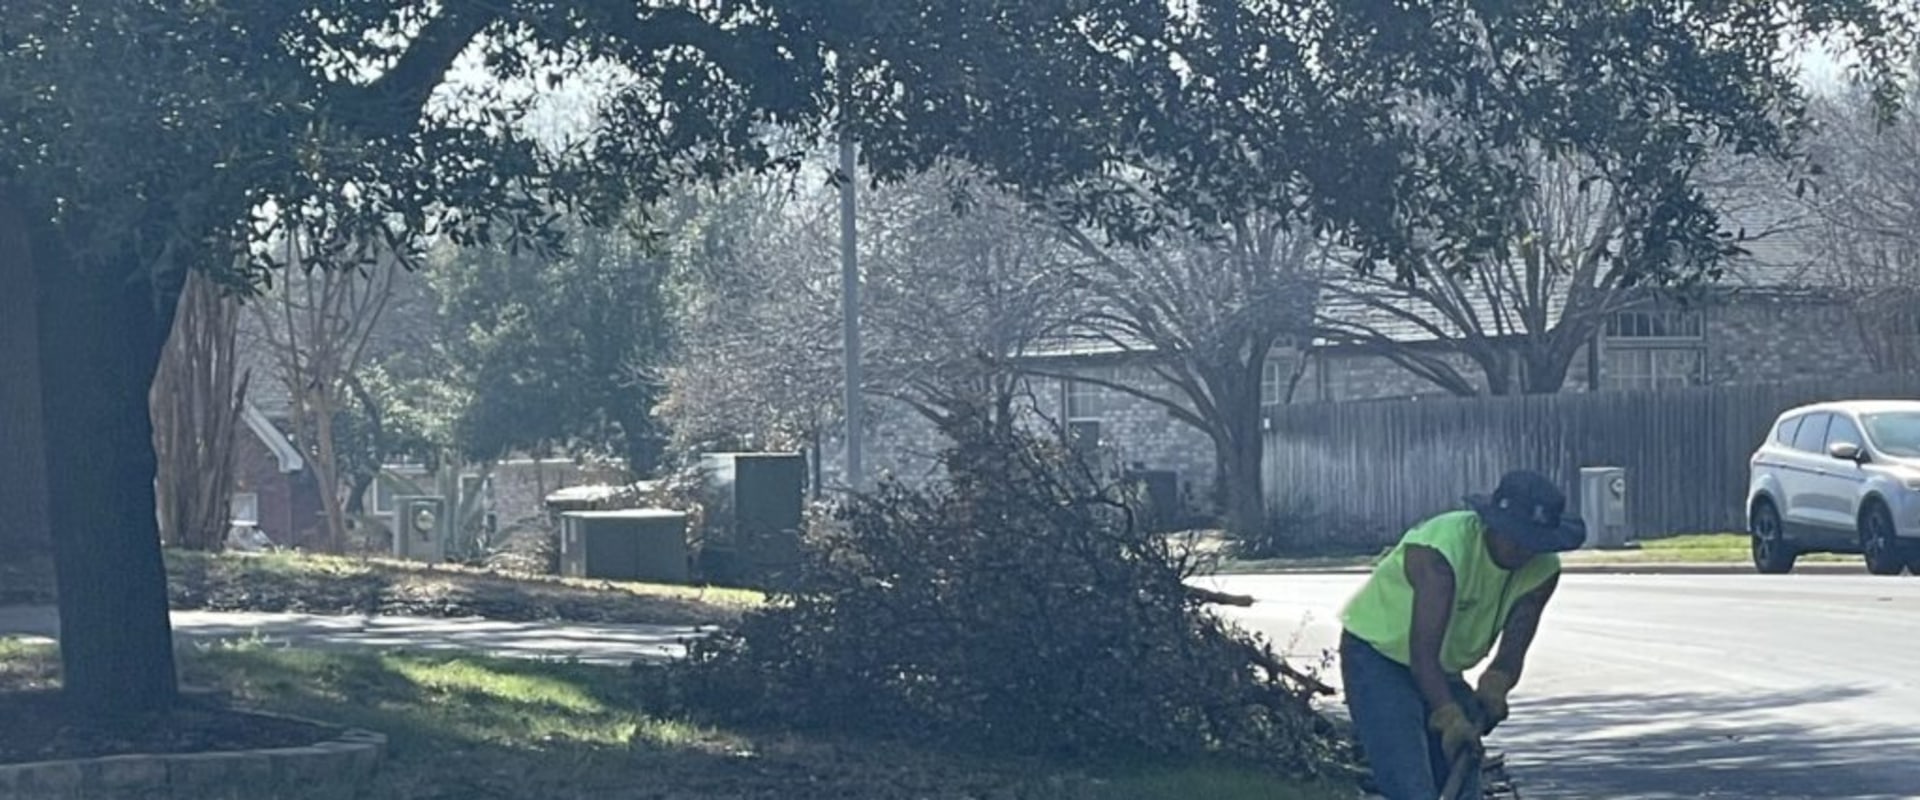 The Ins and Outs of Tree Removal Regulations in Georgetown, TX